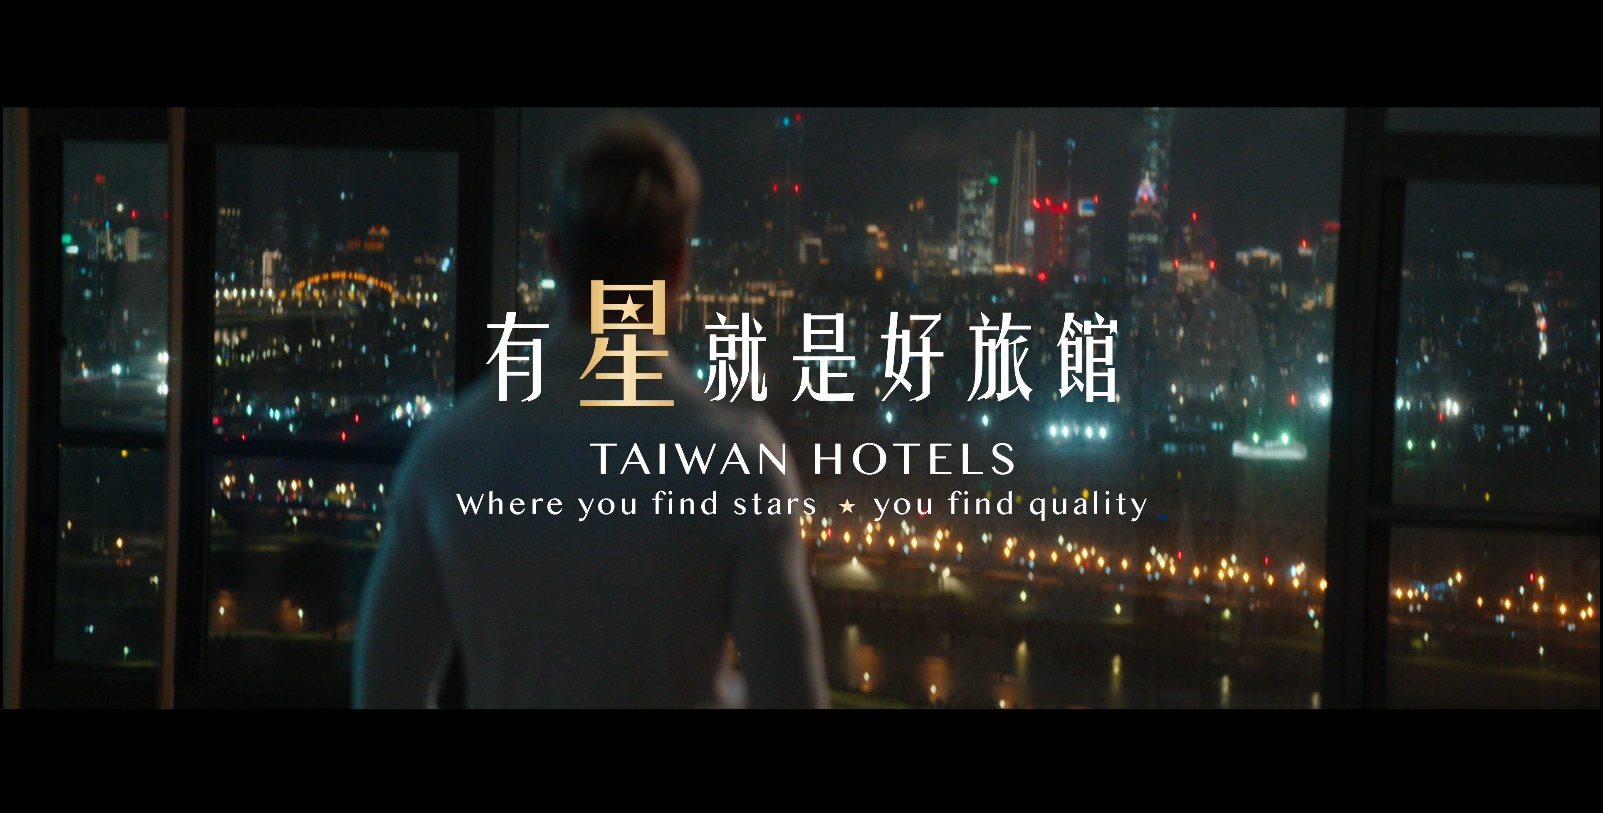  TAIWAN HOTELS - Where you find stars, you find quality.(30s)